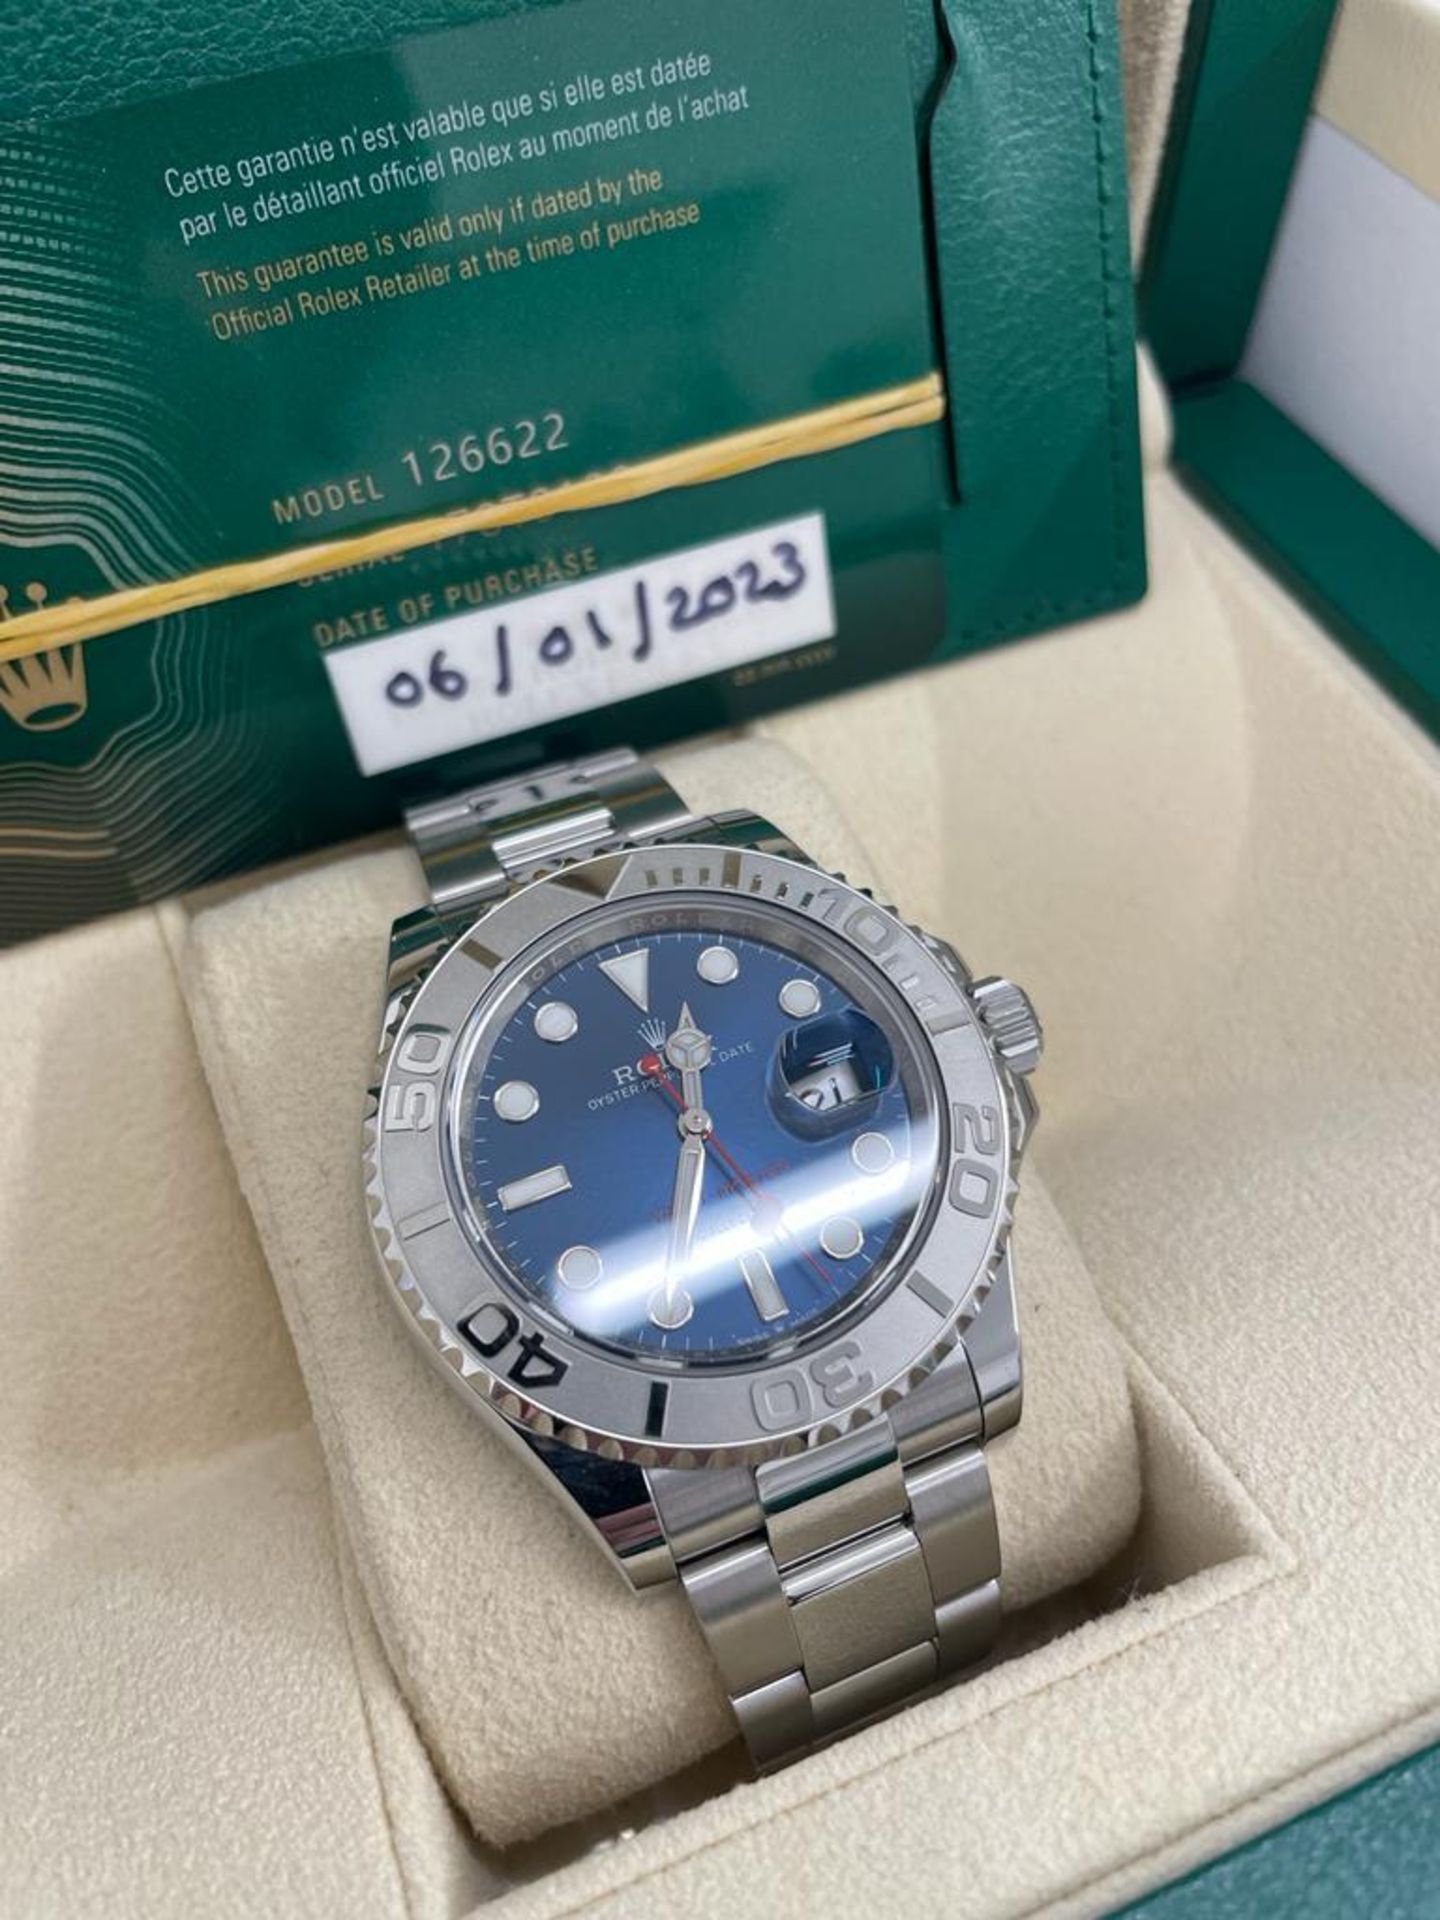 A ROLEX YACHTMASTER 40 MM WRIST WATCH WITH STAINLESS STEEL CASE AND BRACELET, SOUGHT AFTER BLUE - Image 3 of 5